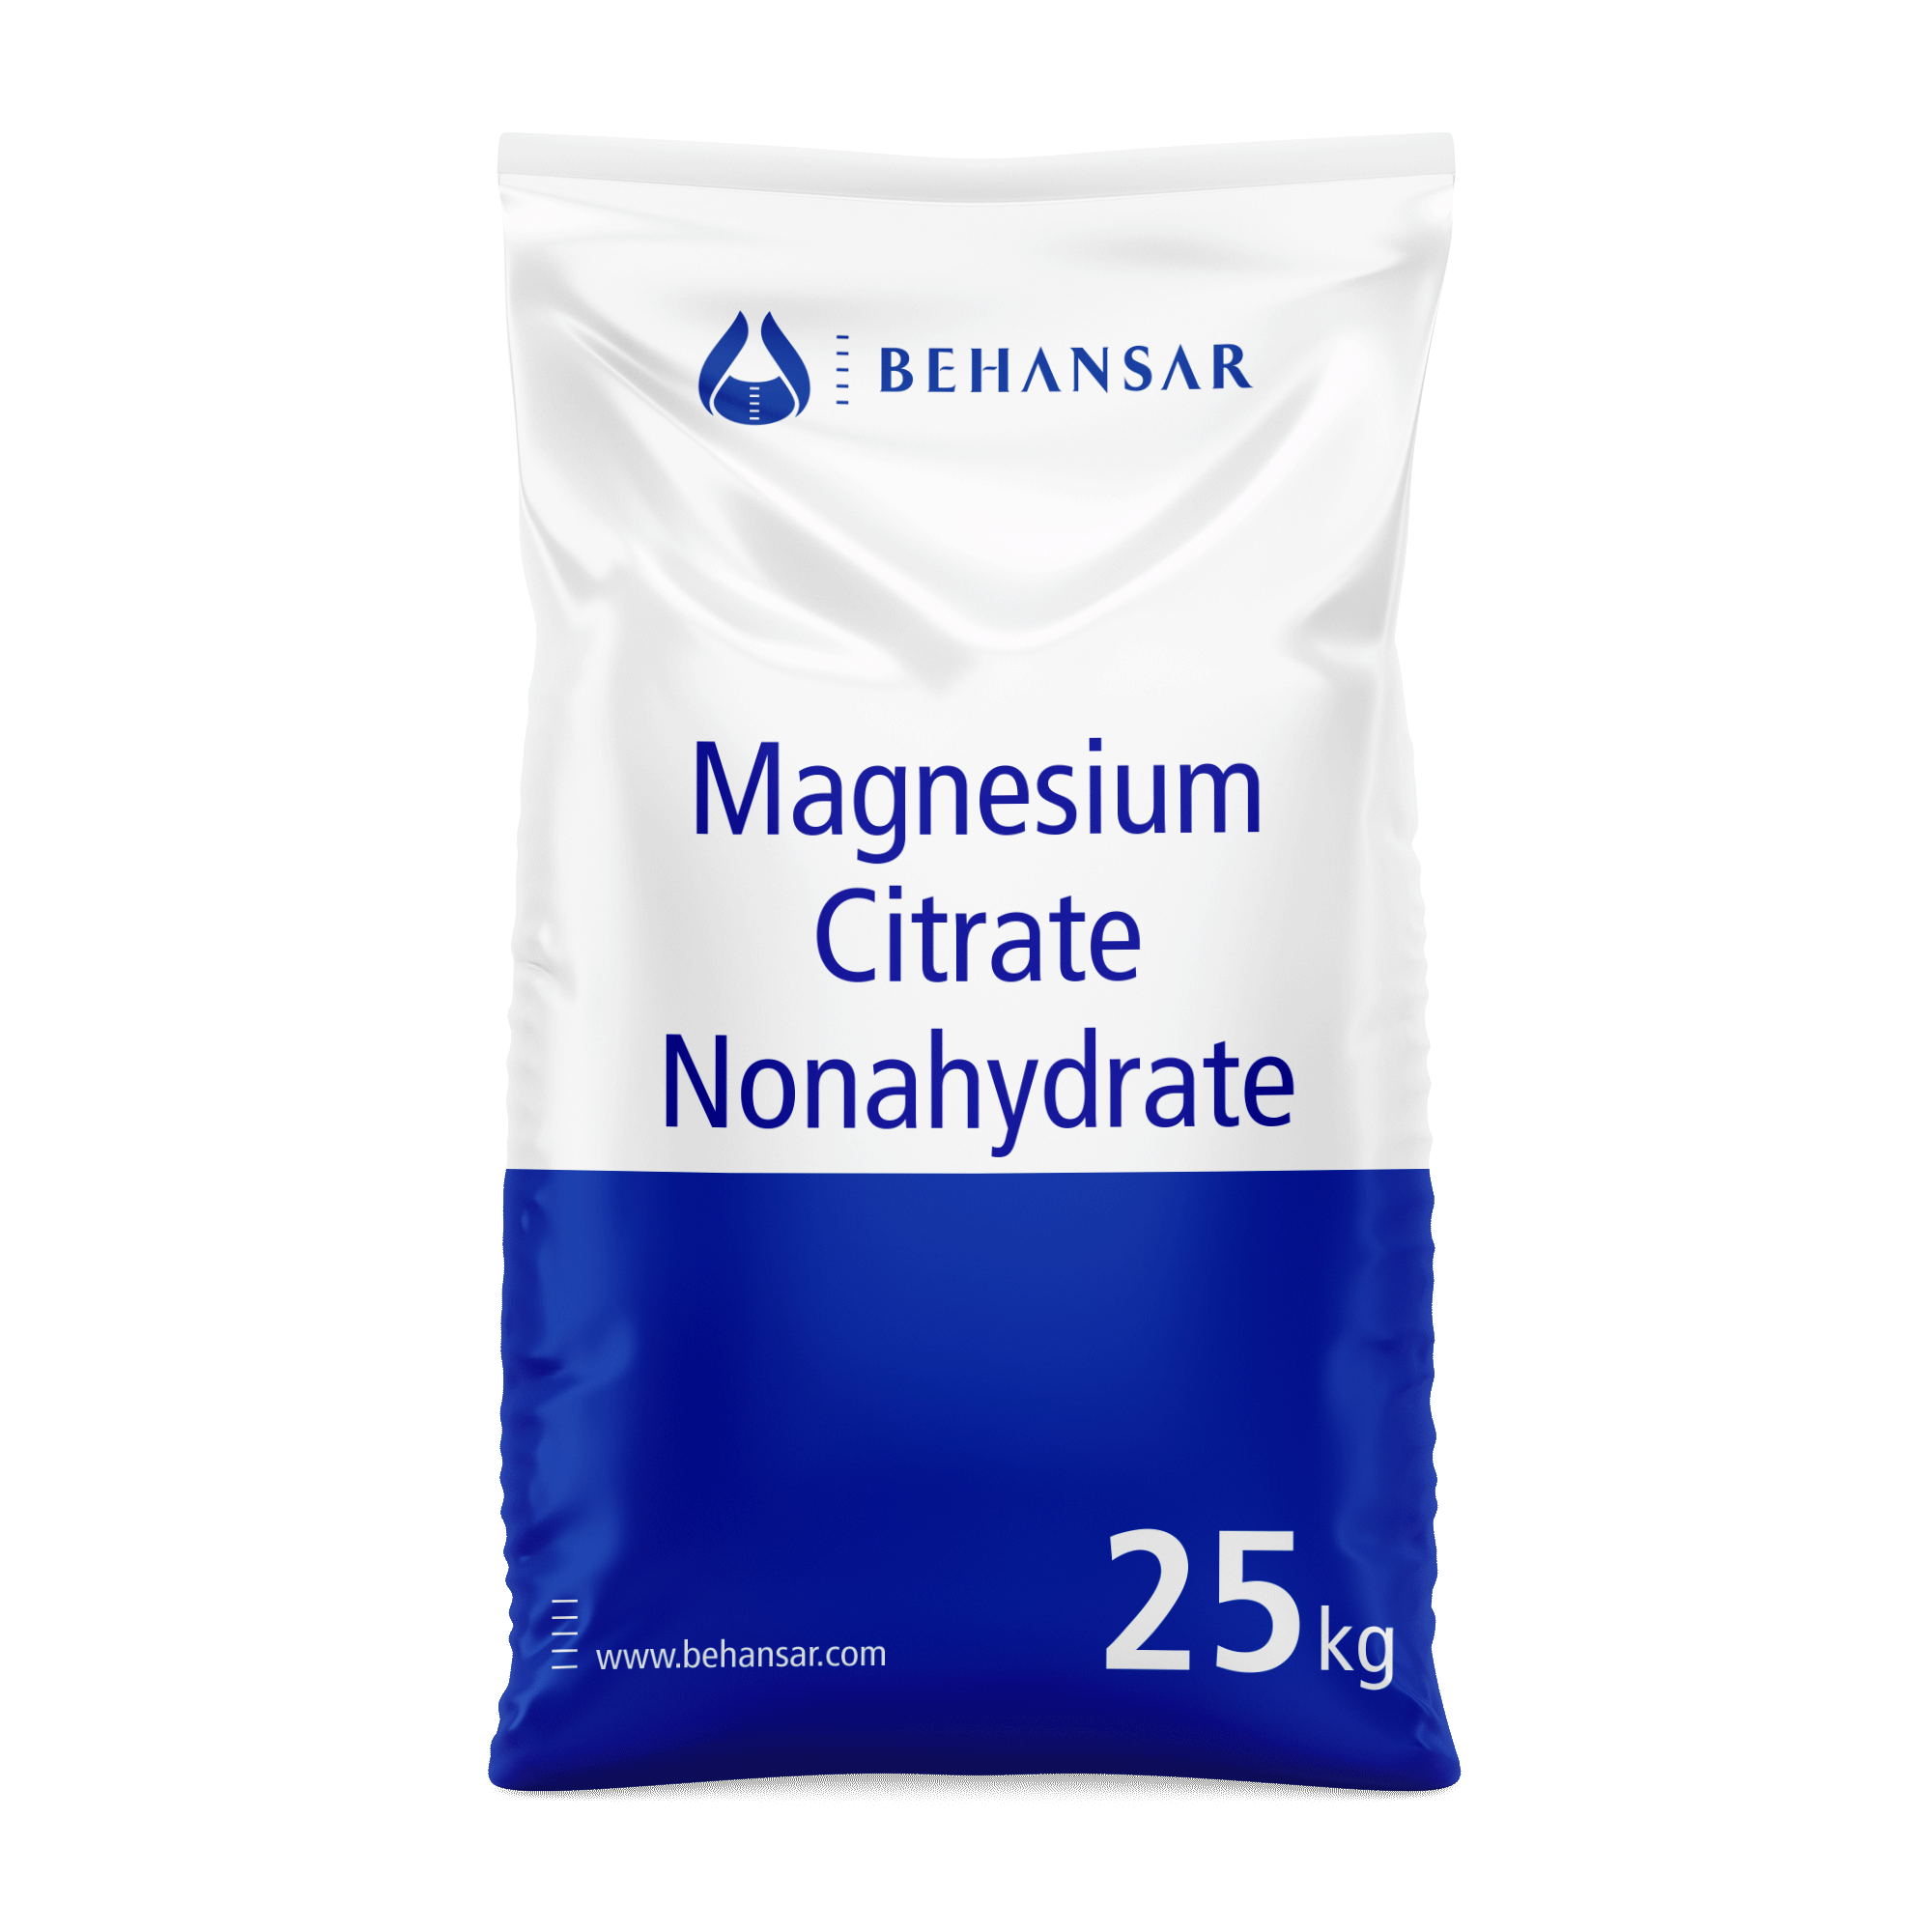 Magnesium Citrate Nonahydrate is one of the products of Behansar Co